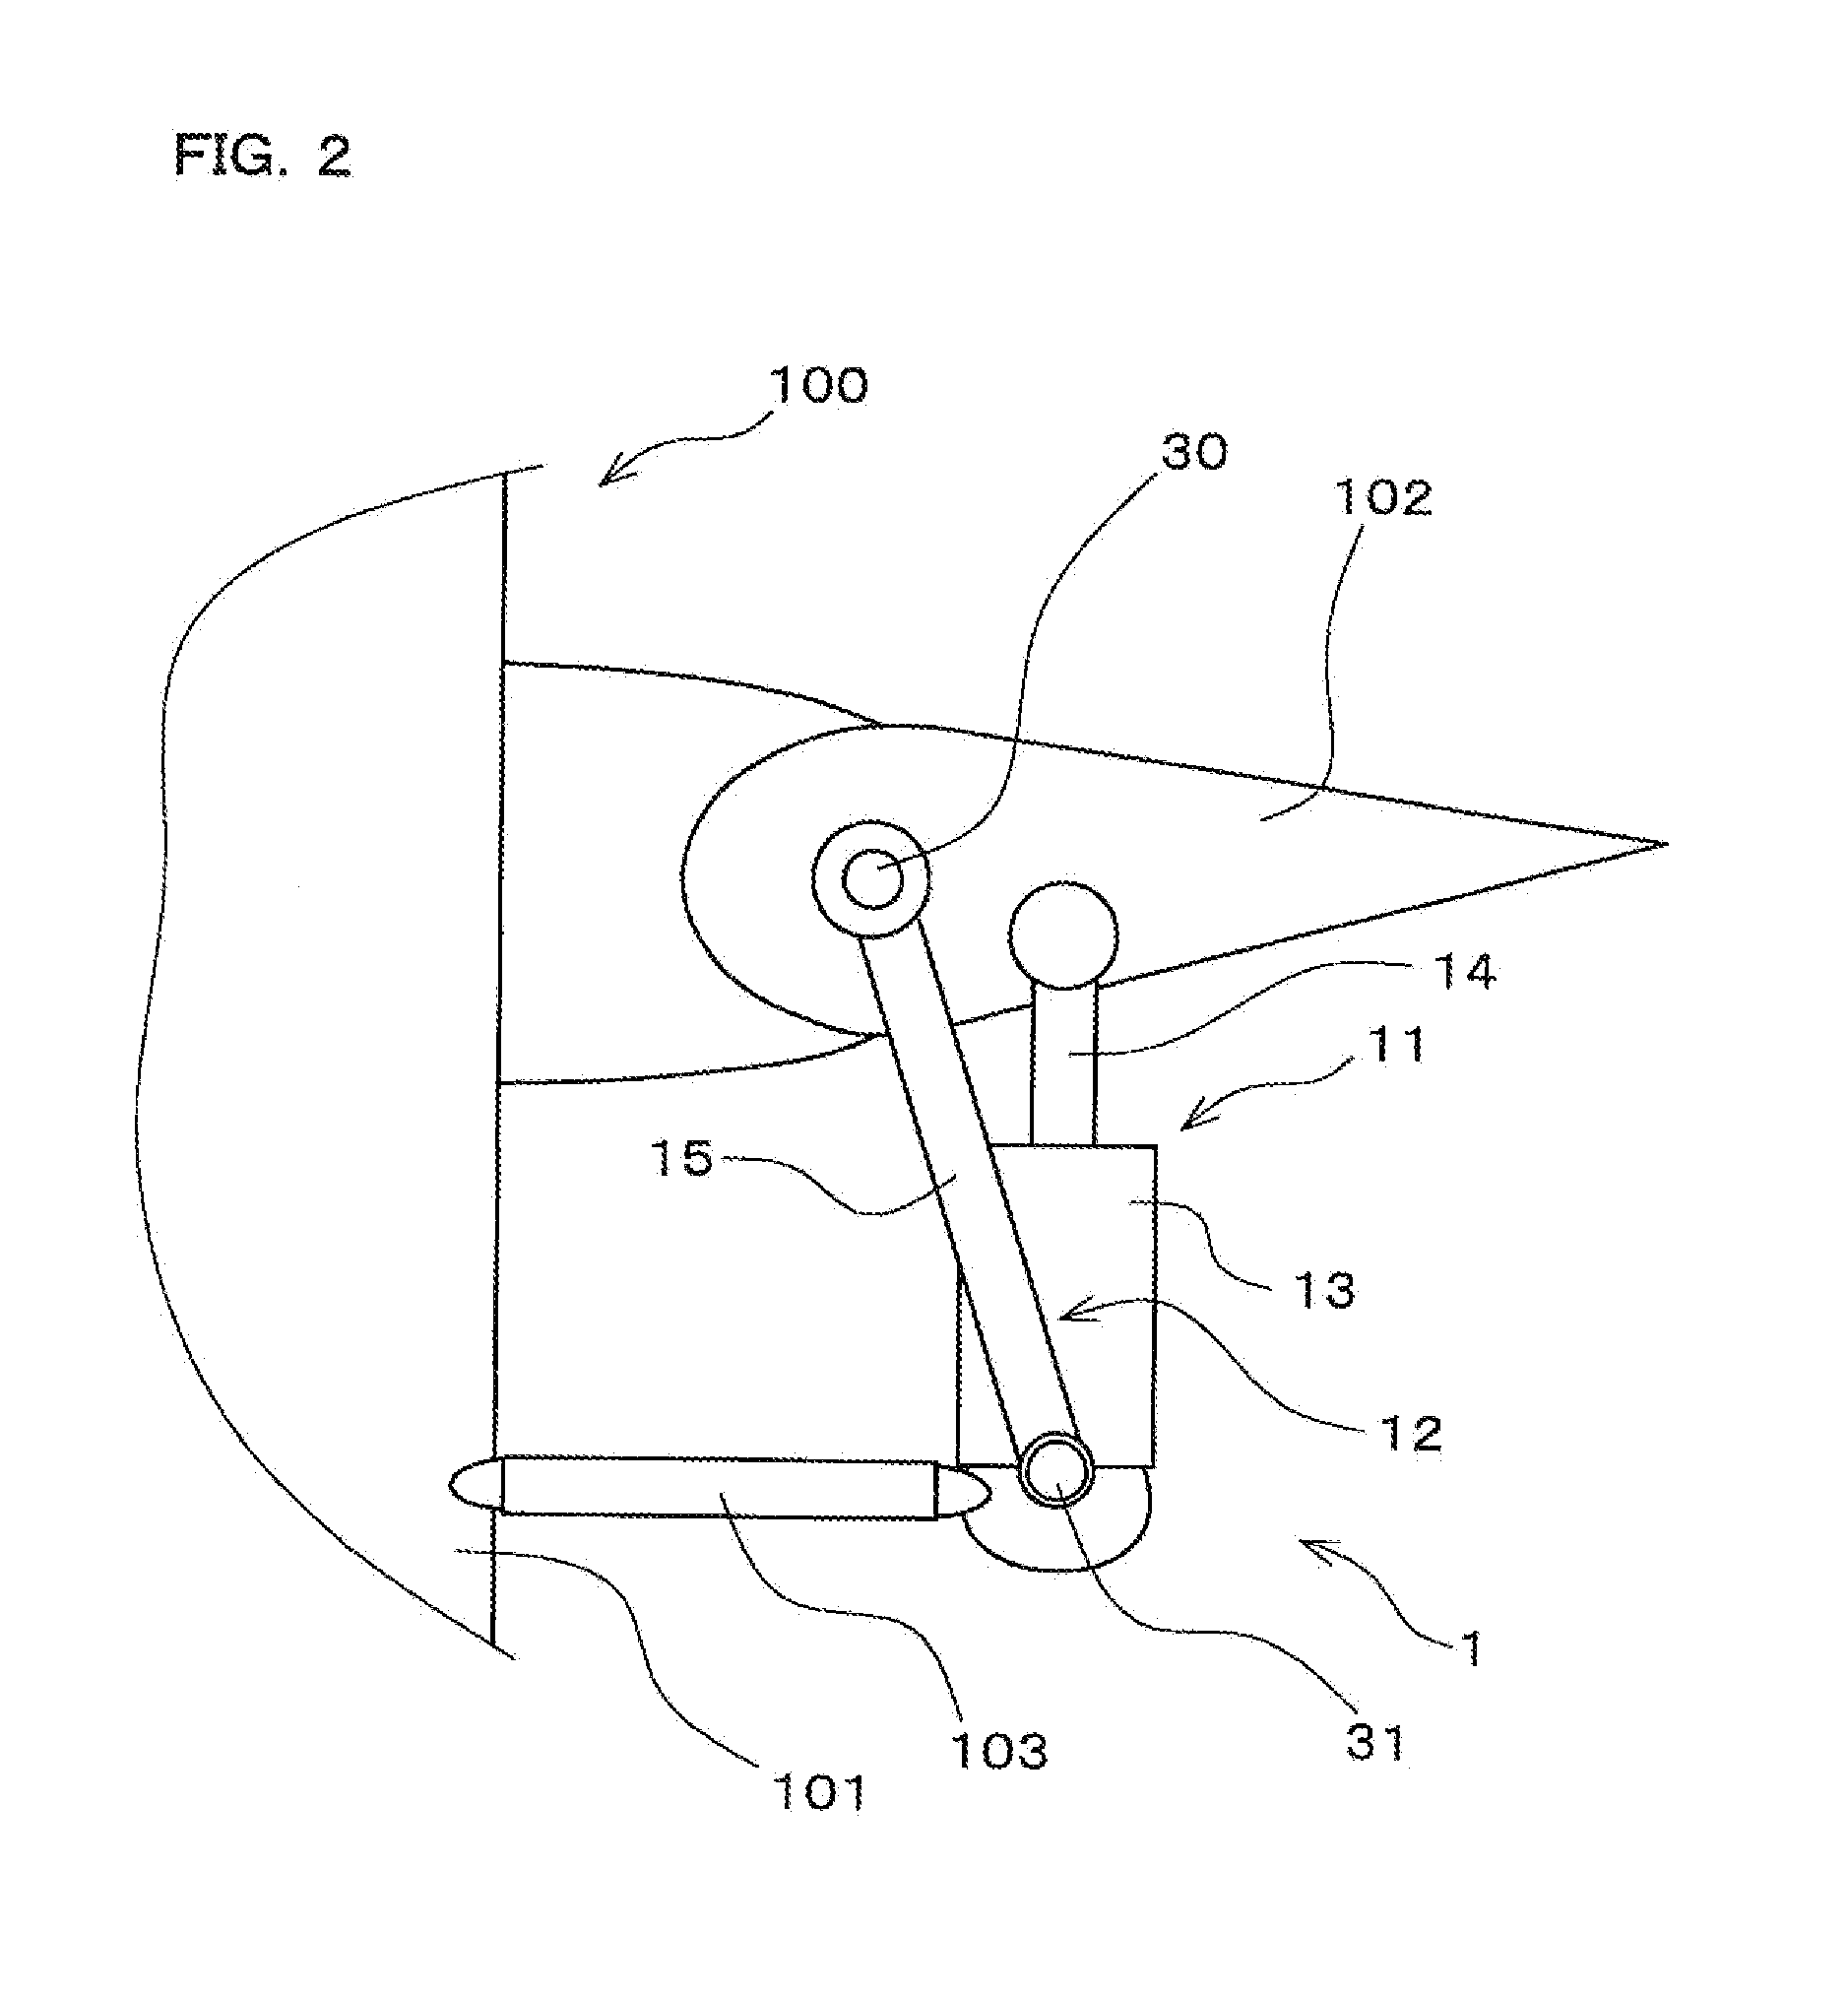 Actuator-link assembly manufacturing method, actuator-link assembly designing method, and actuator-link assembly